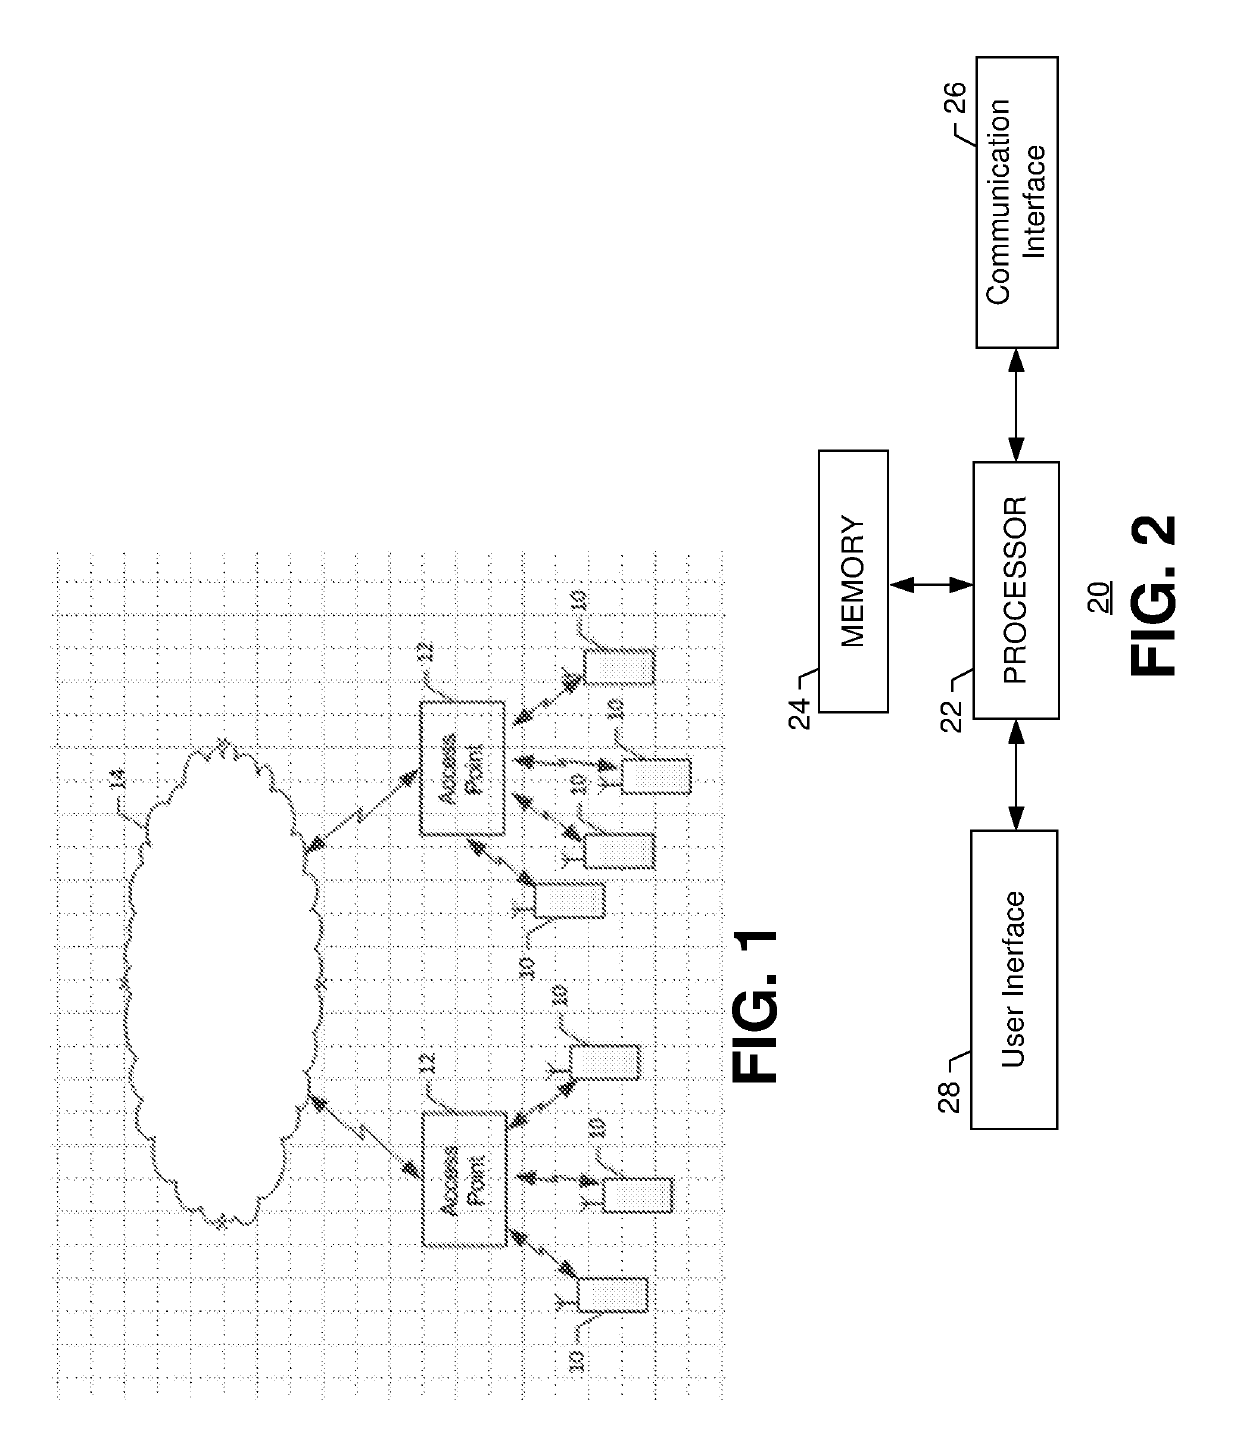 Method and apparatus for end-to-end QoS/QoE management in 5G systems